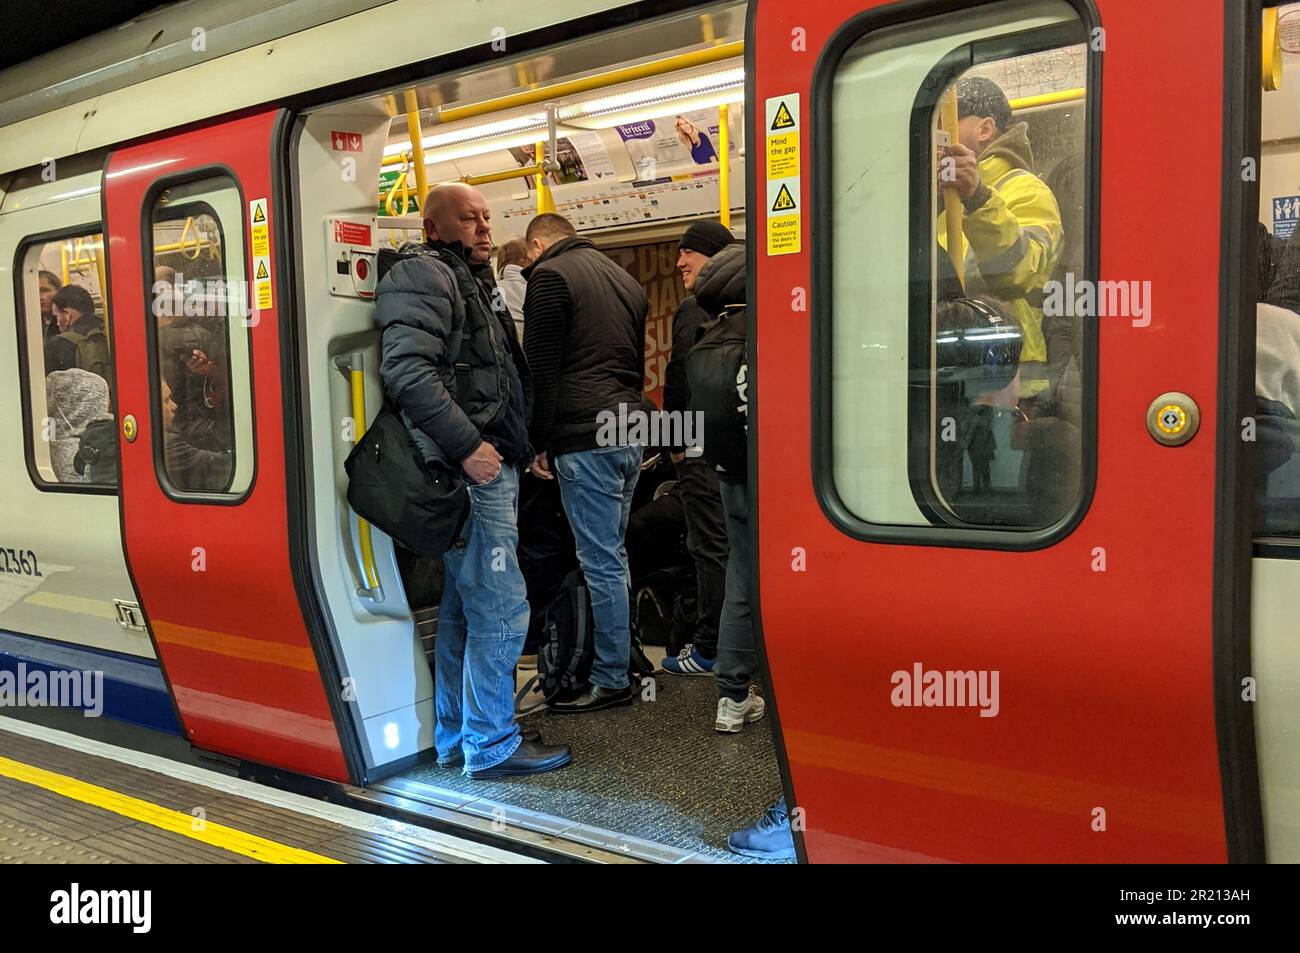 Photograph of an overcrowded London Underground train on which passengers were unable to observe social distancing of at least 2 metres just days after the UK government ordered pubs, clubs, restaurants, bars and gyms to shut as the concern over the COVID-19 coronavirus pandemic grew Stock Photo